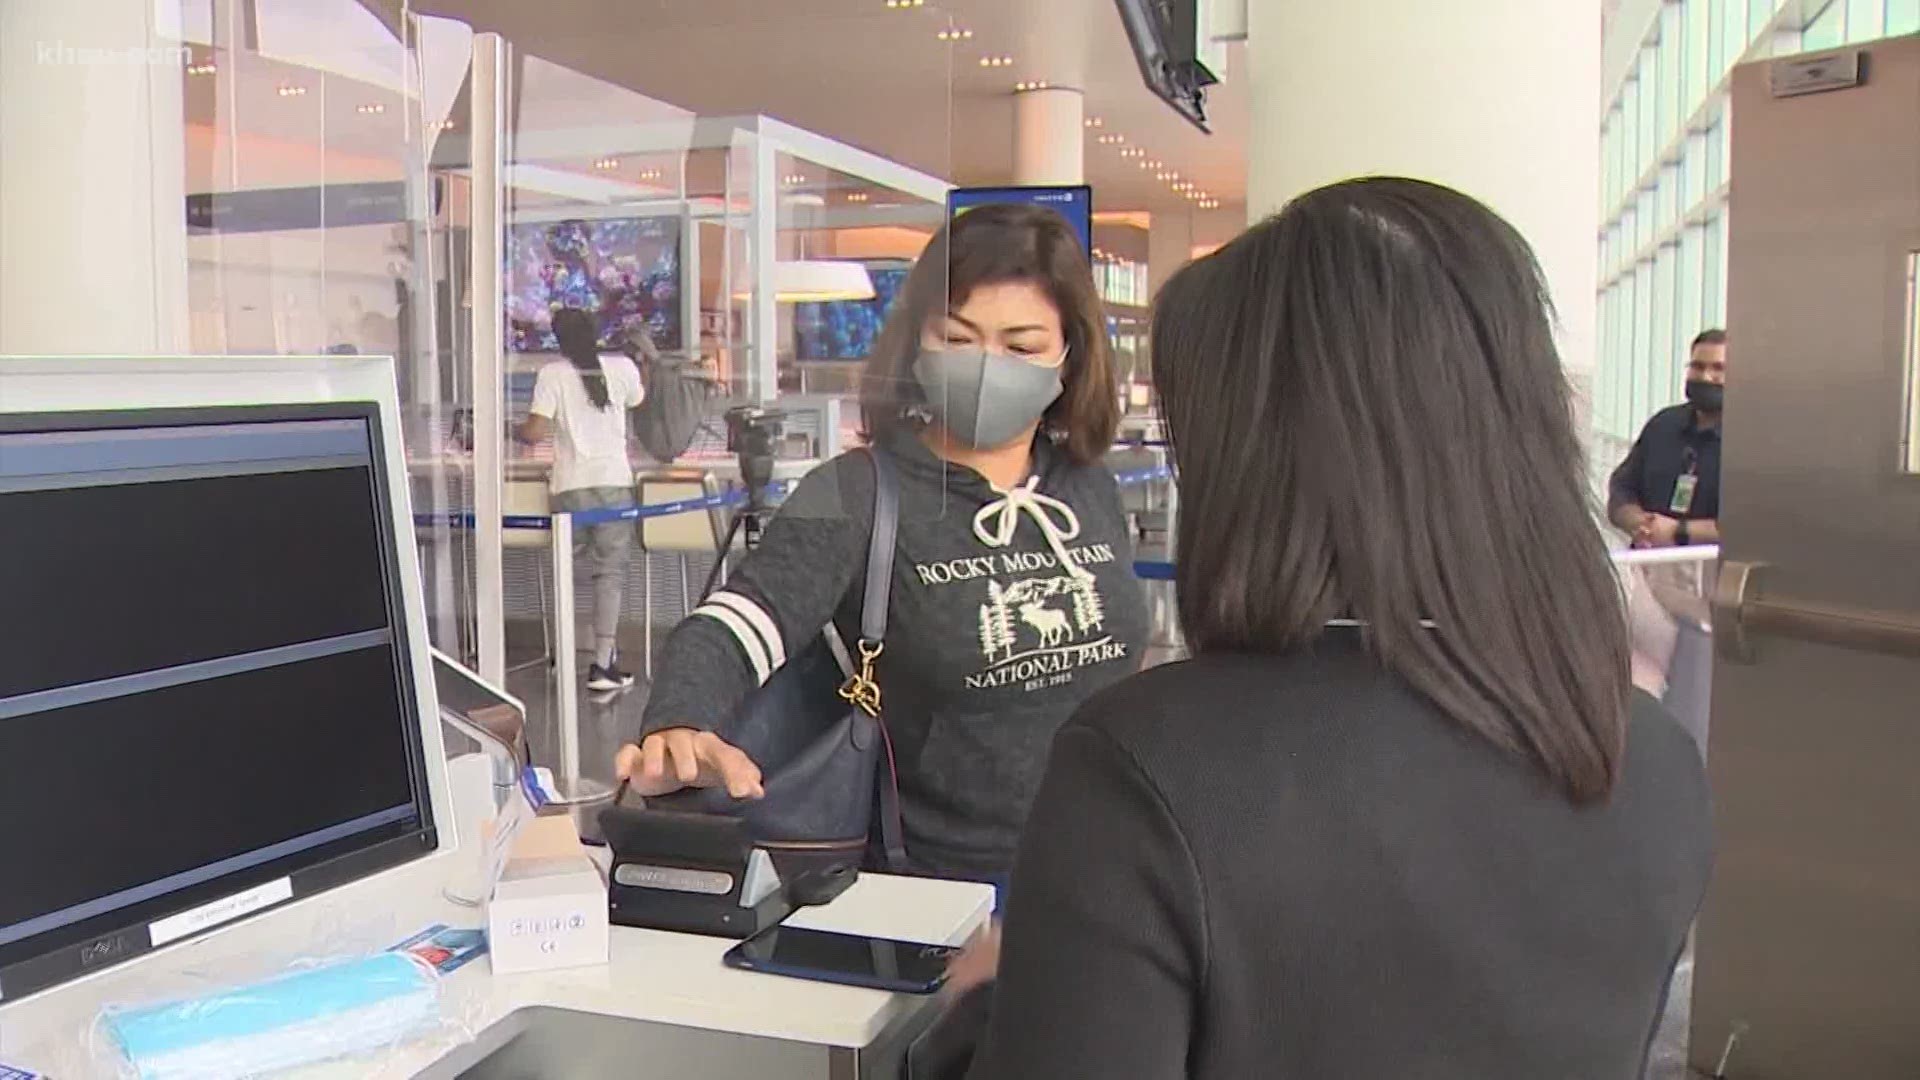 United, American, Delta and several airlines are beginning to enforce more strict mask requirements for requirements as we head into summer travel season.